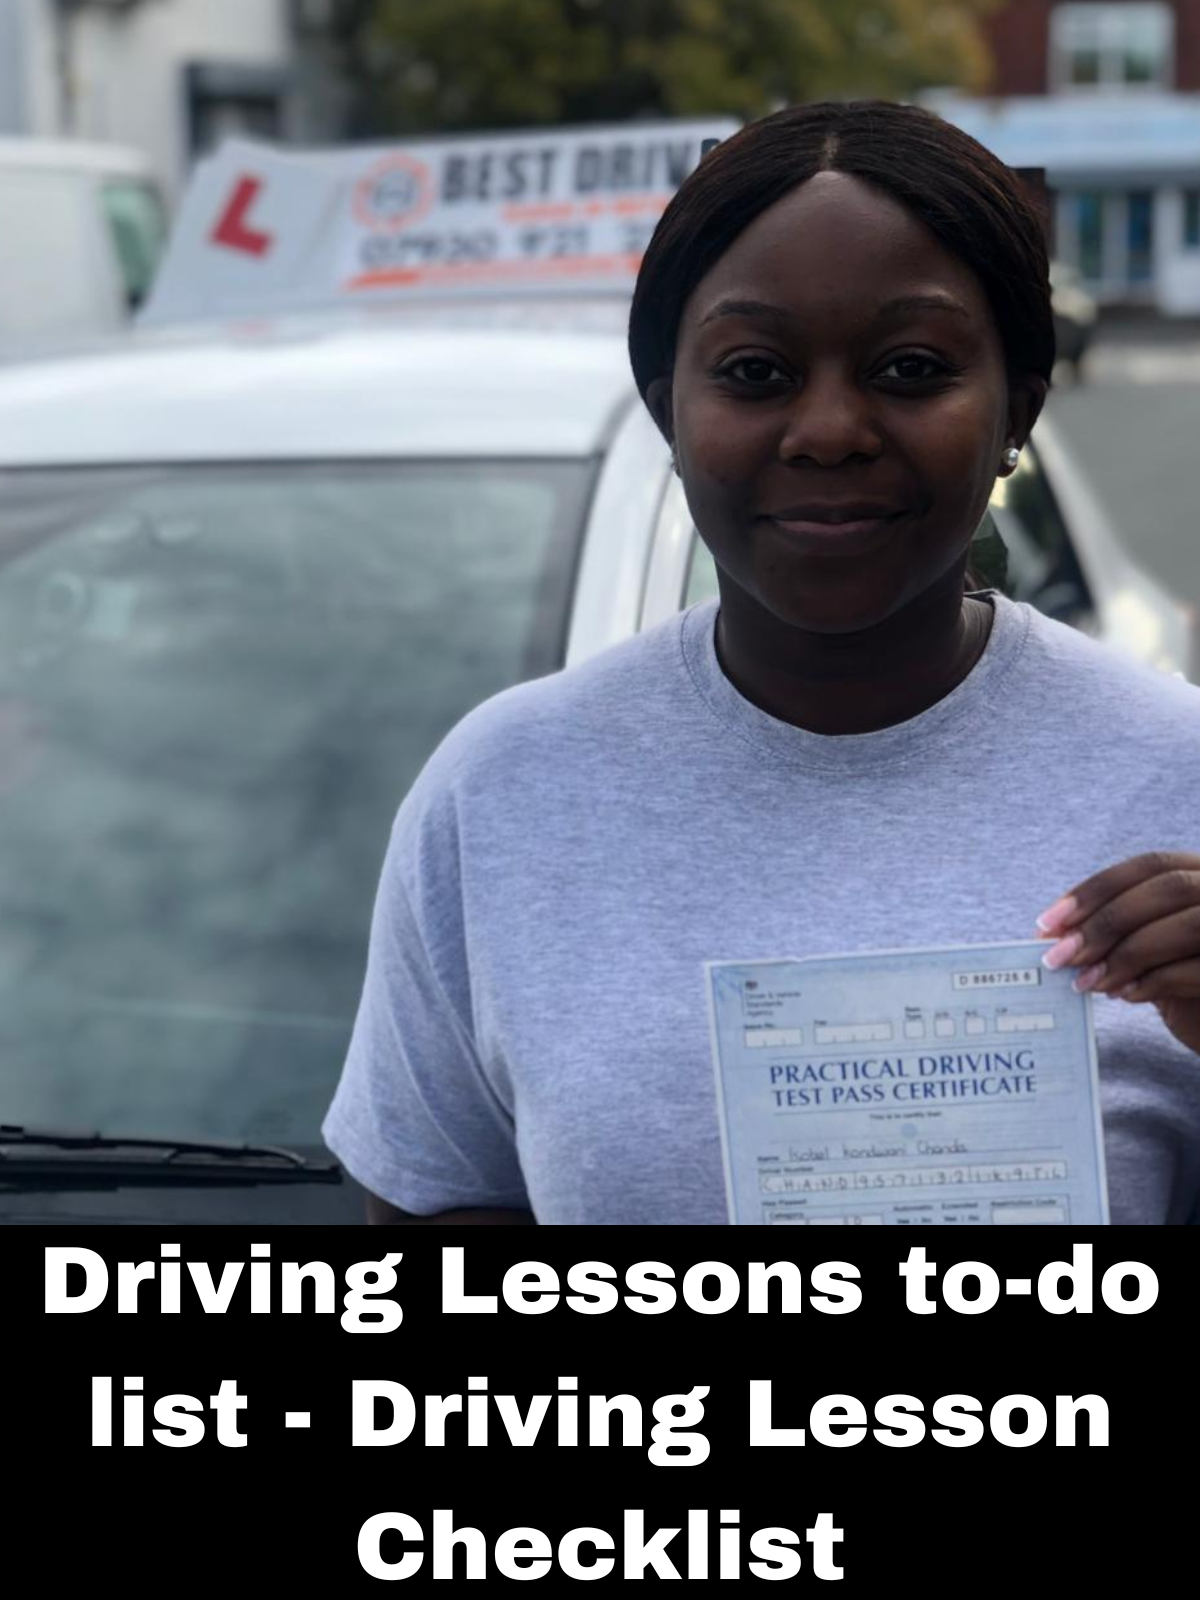 Driving Lessons to-do list - Driving Lesson Checklist